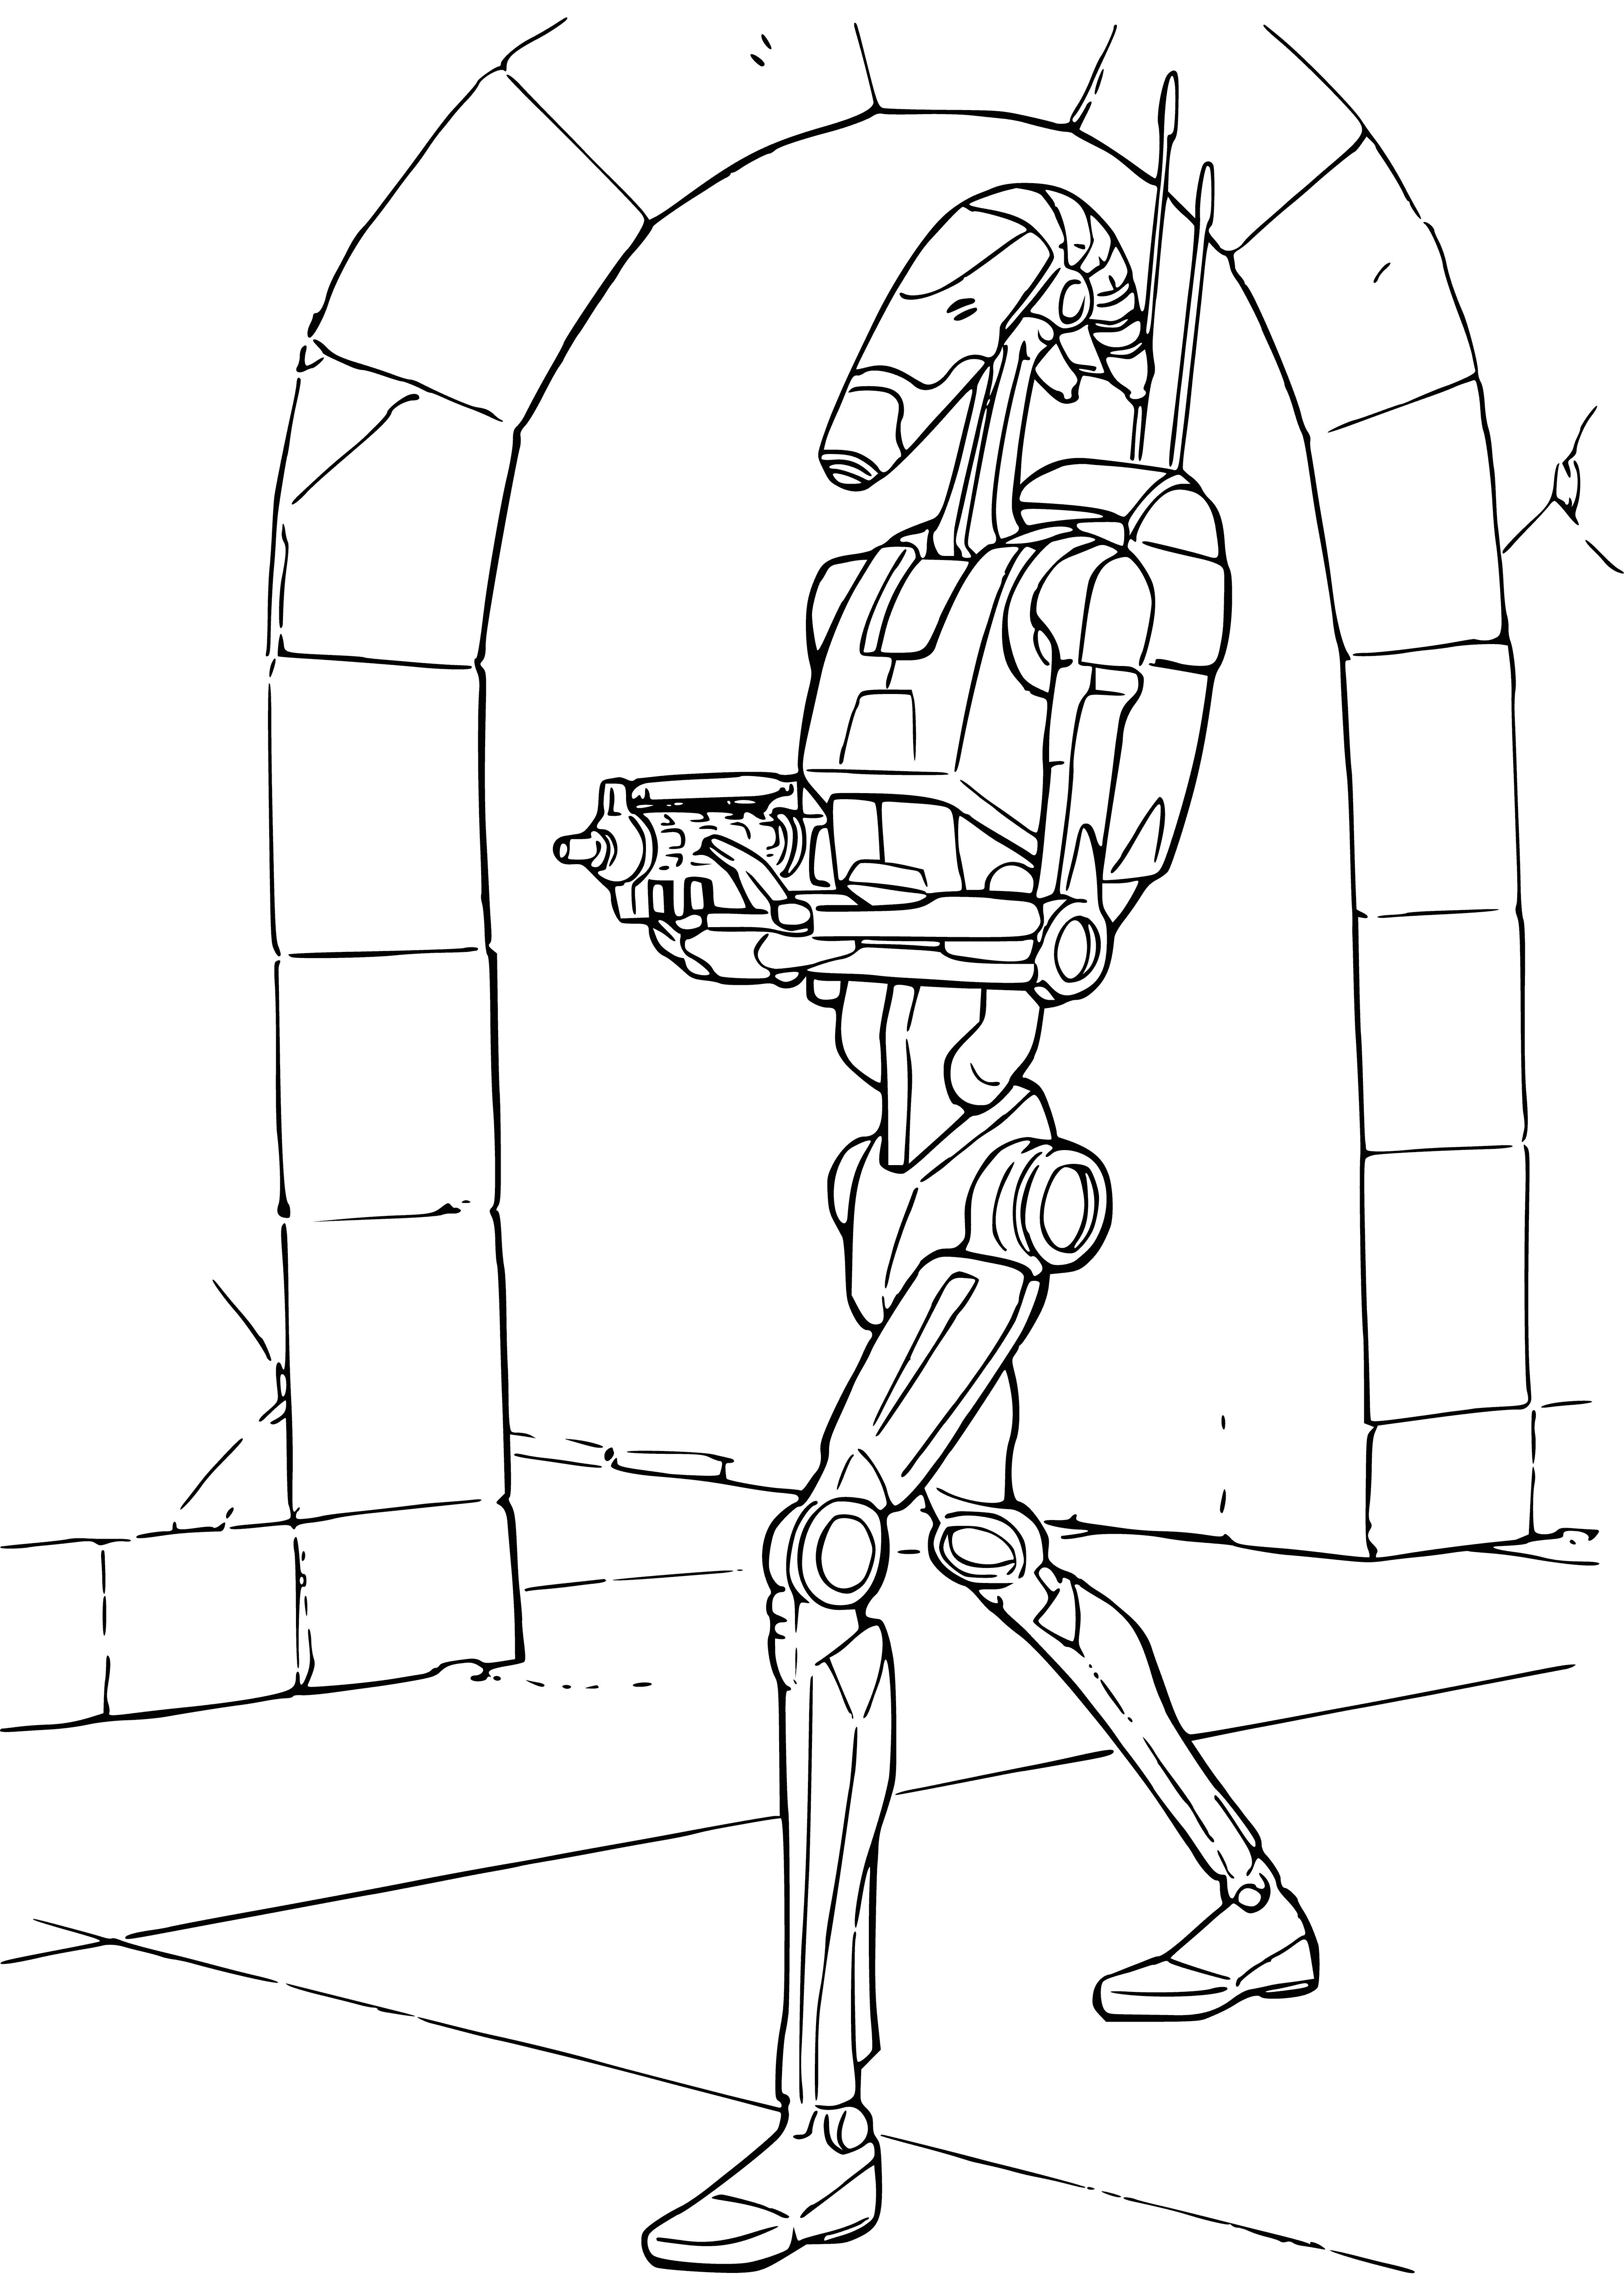 coloring page: People gaze in awe at large battle android; humanoid in shape, mostly silver w/black accents. Weapons include sword, blaster, & grenade launcher.